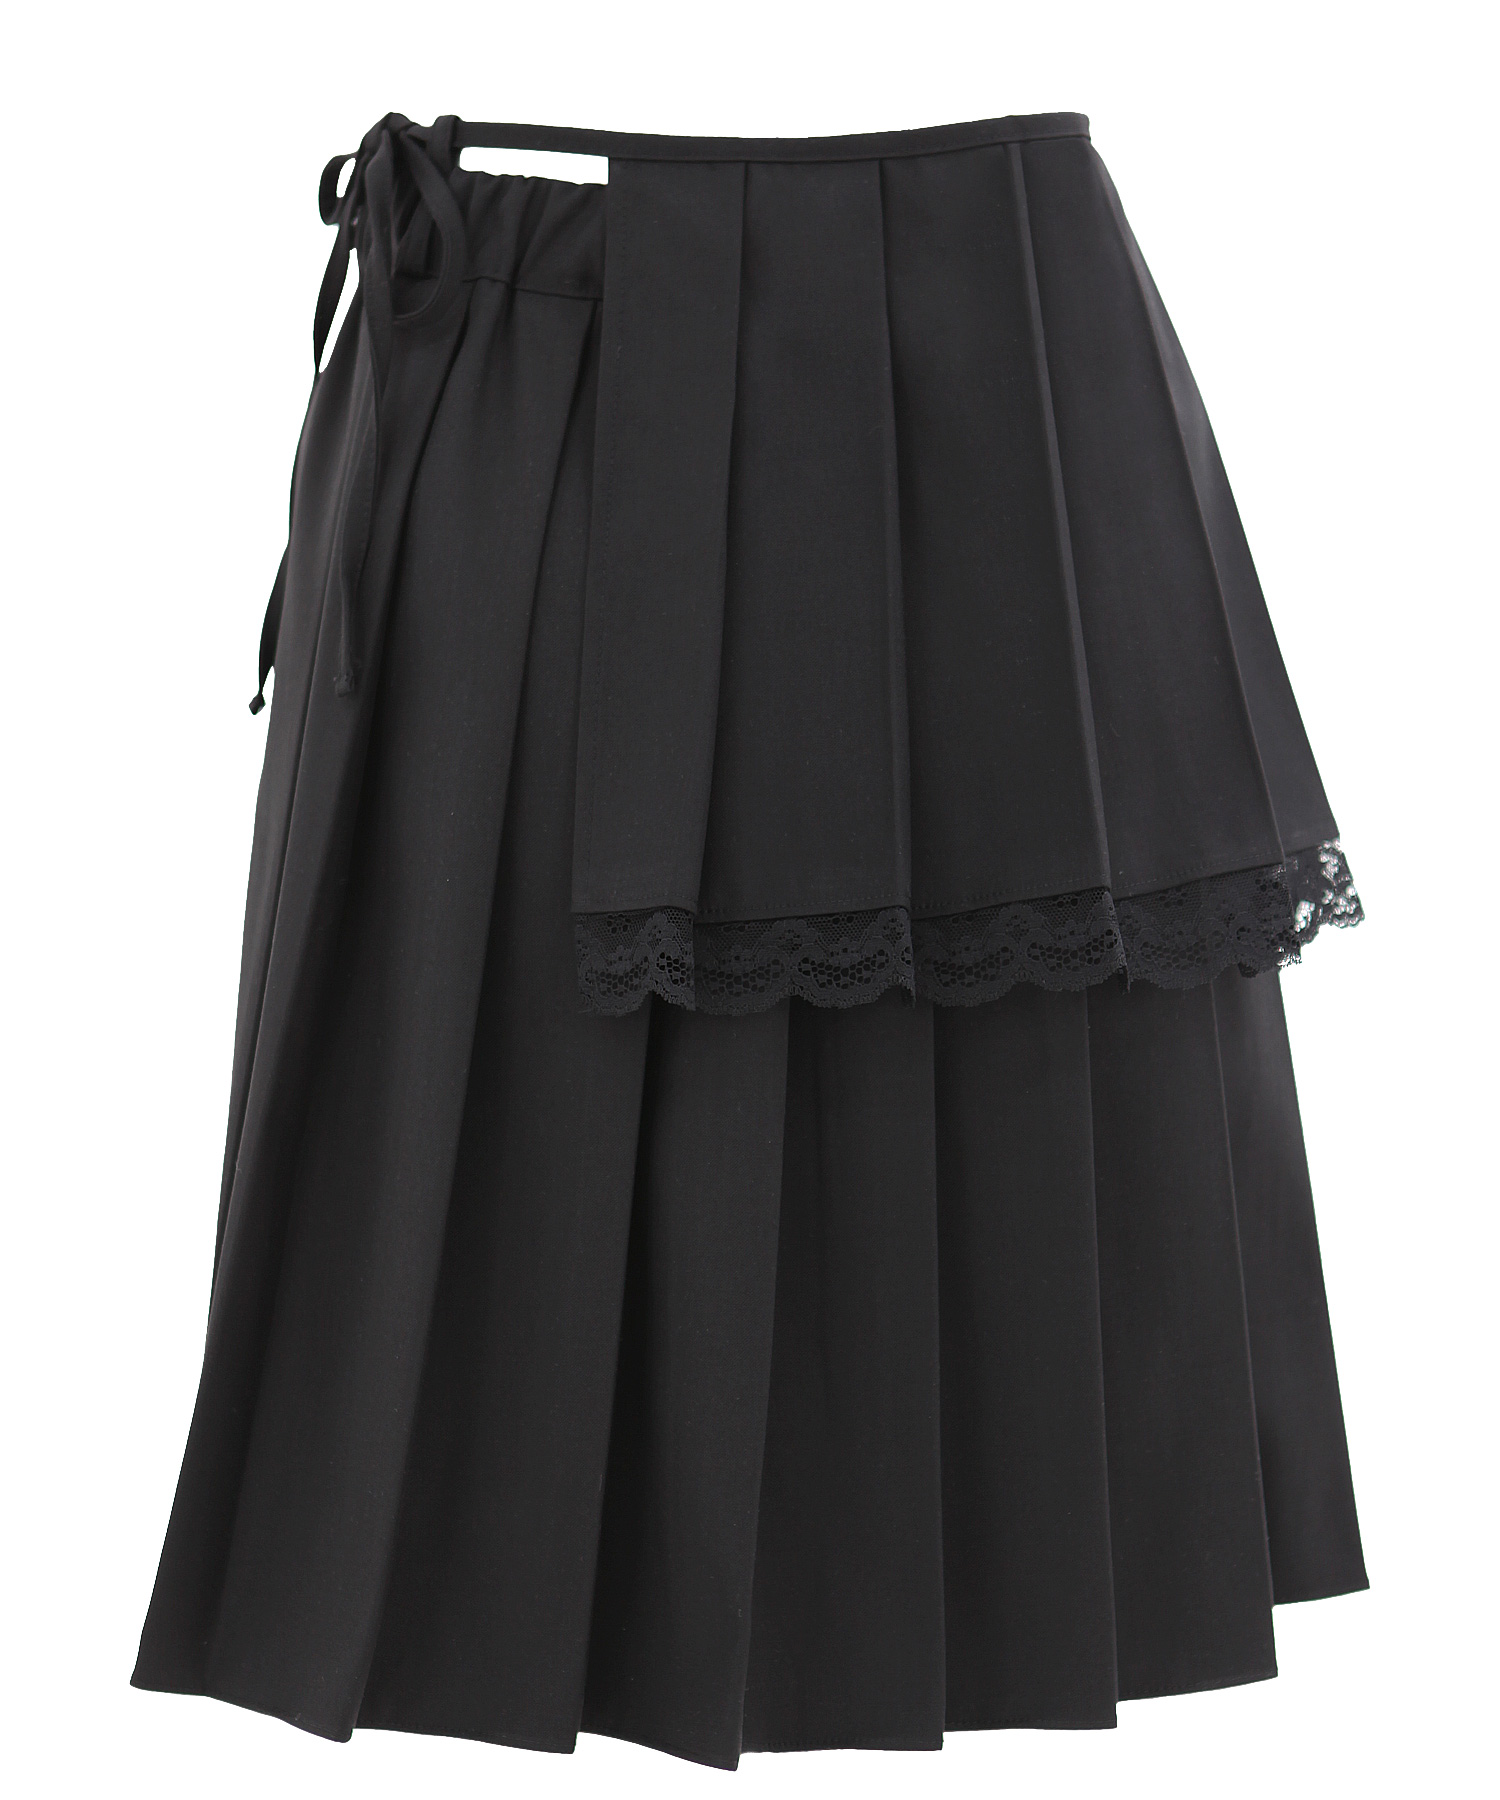 DUAL SKIRT IN BLACK pre-order delivery on June 5th